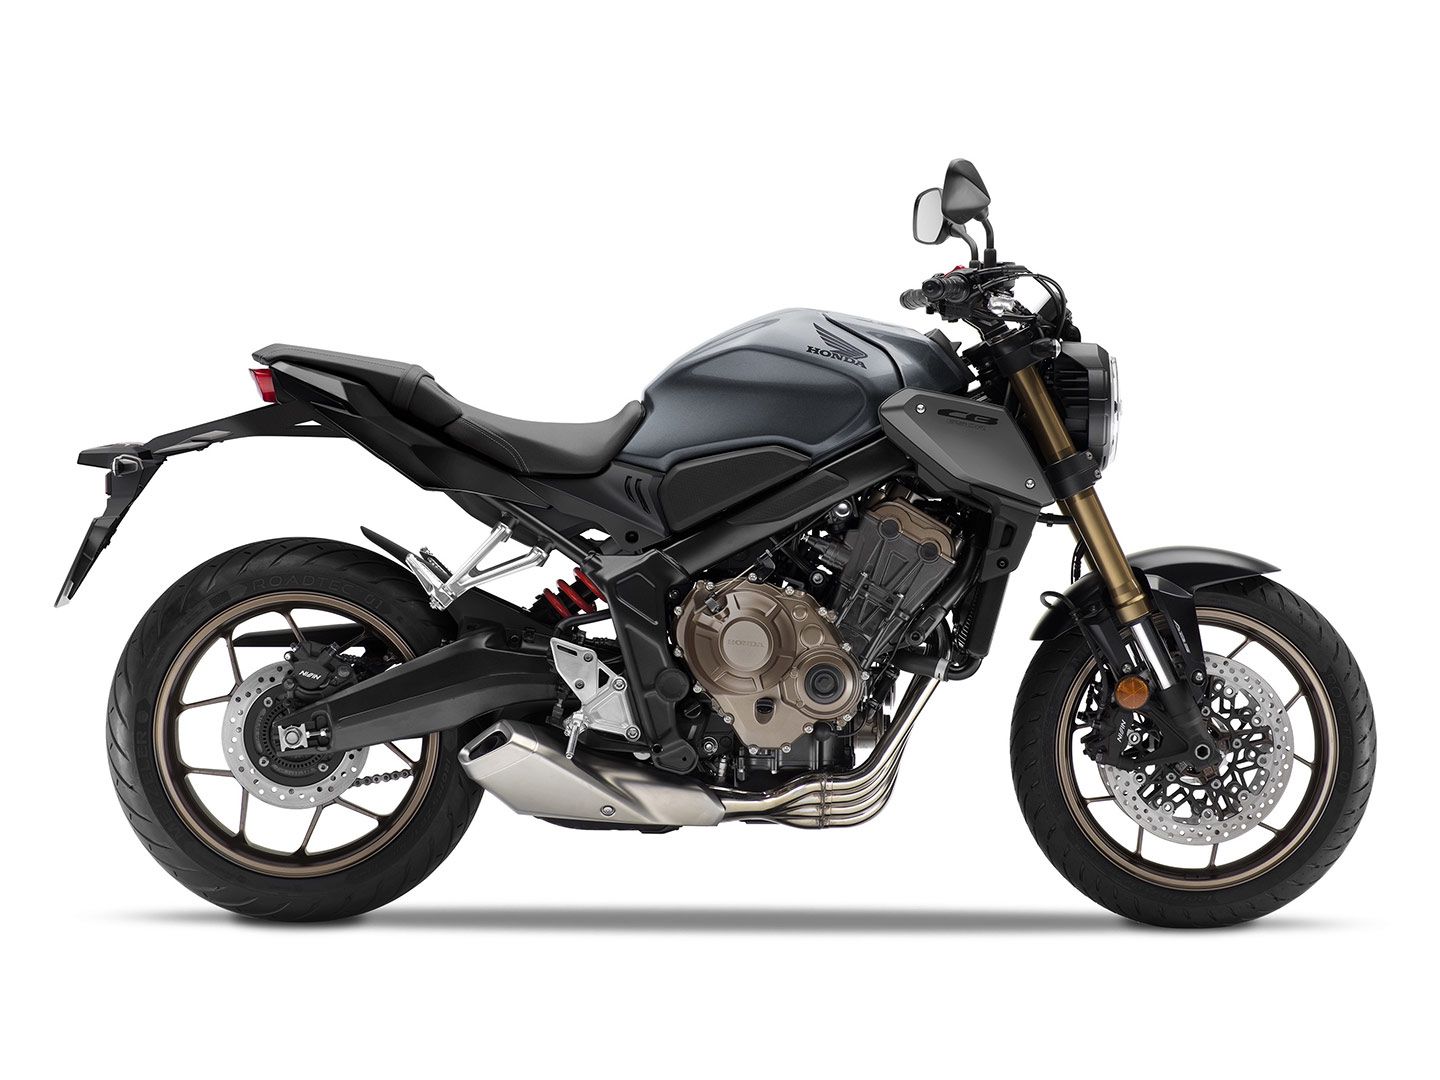 Honda’s CB650R is now available in Matte Grey Metallic, for $9,399.